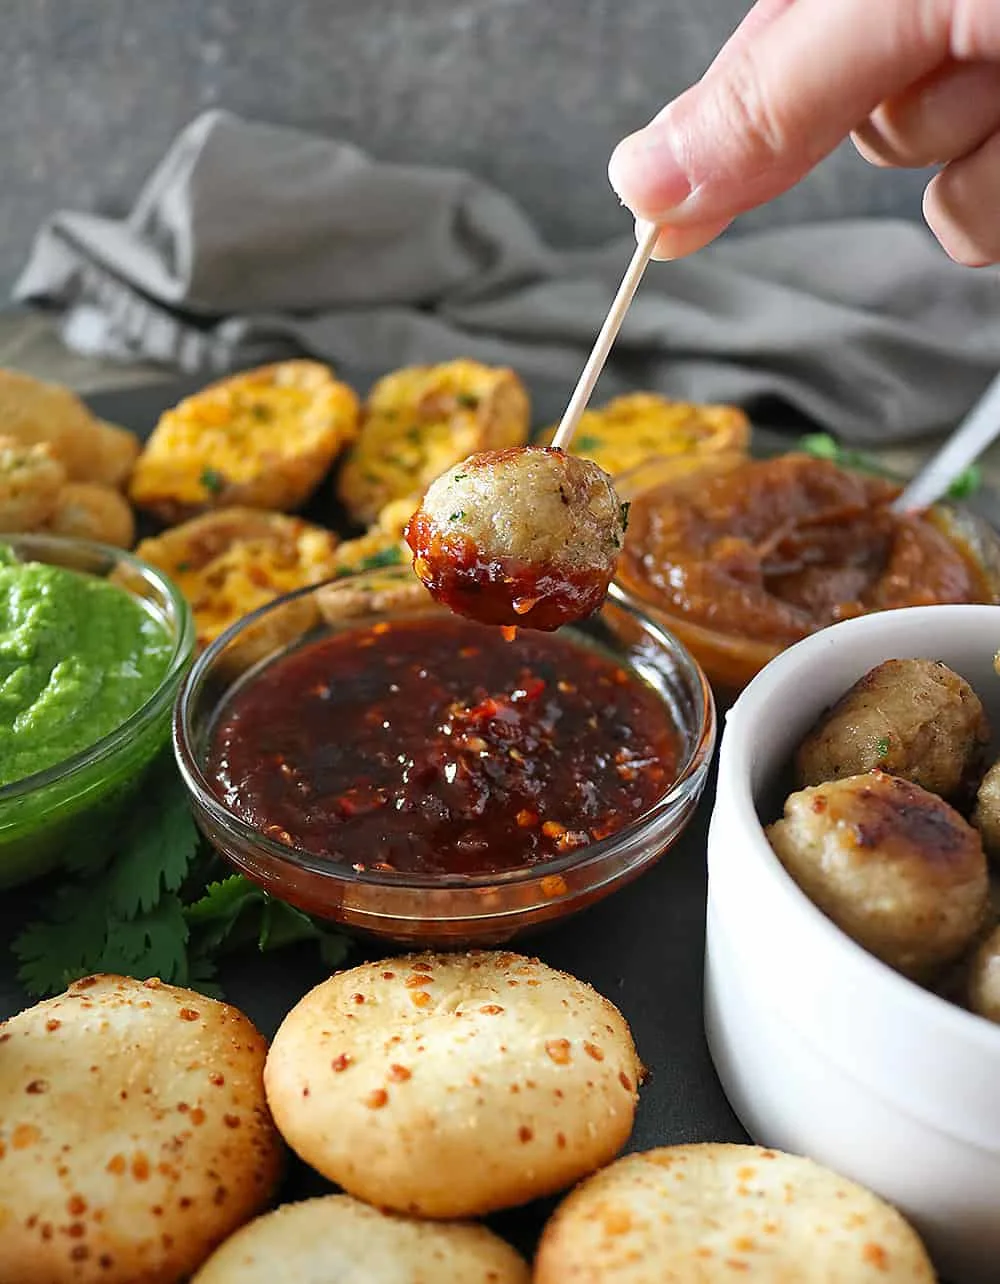 Delicious Spicy Maple- Chili Sauce And FarmRich Meatballs for the Big Game!